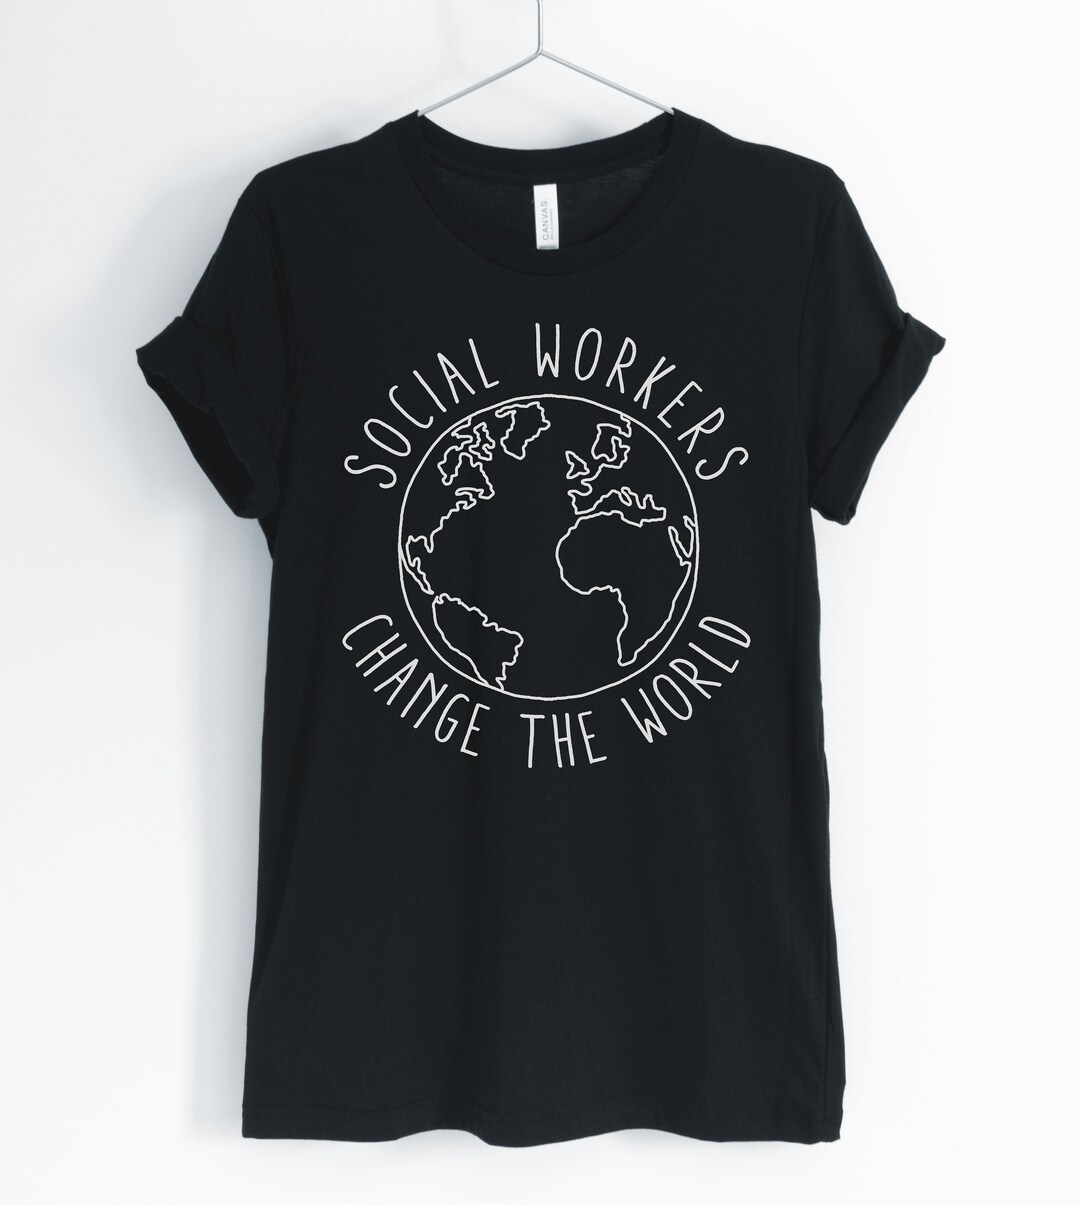 Social Workers Change the World Social Worker Shirt Cute - Etsy